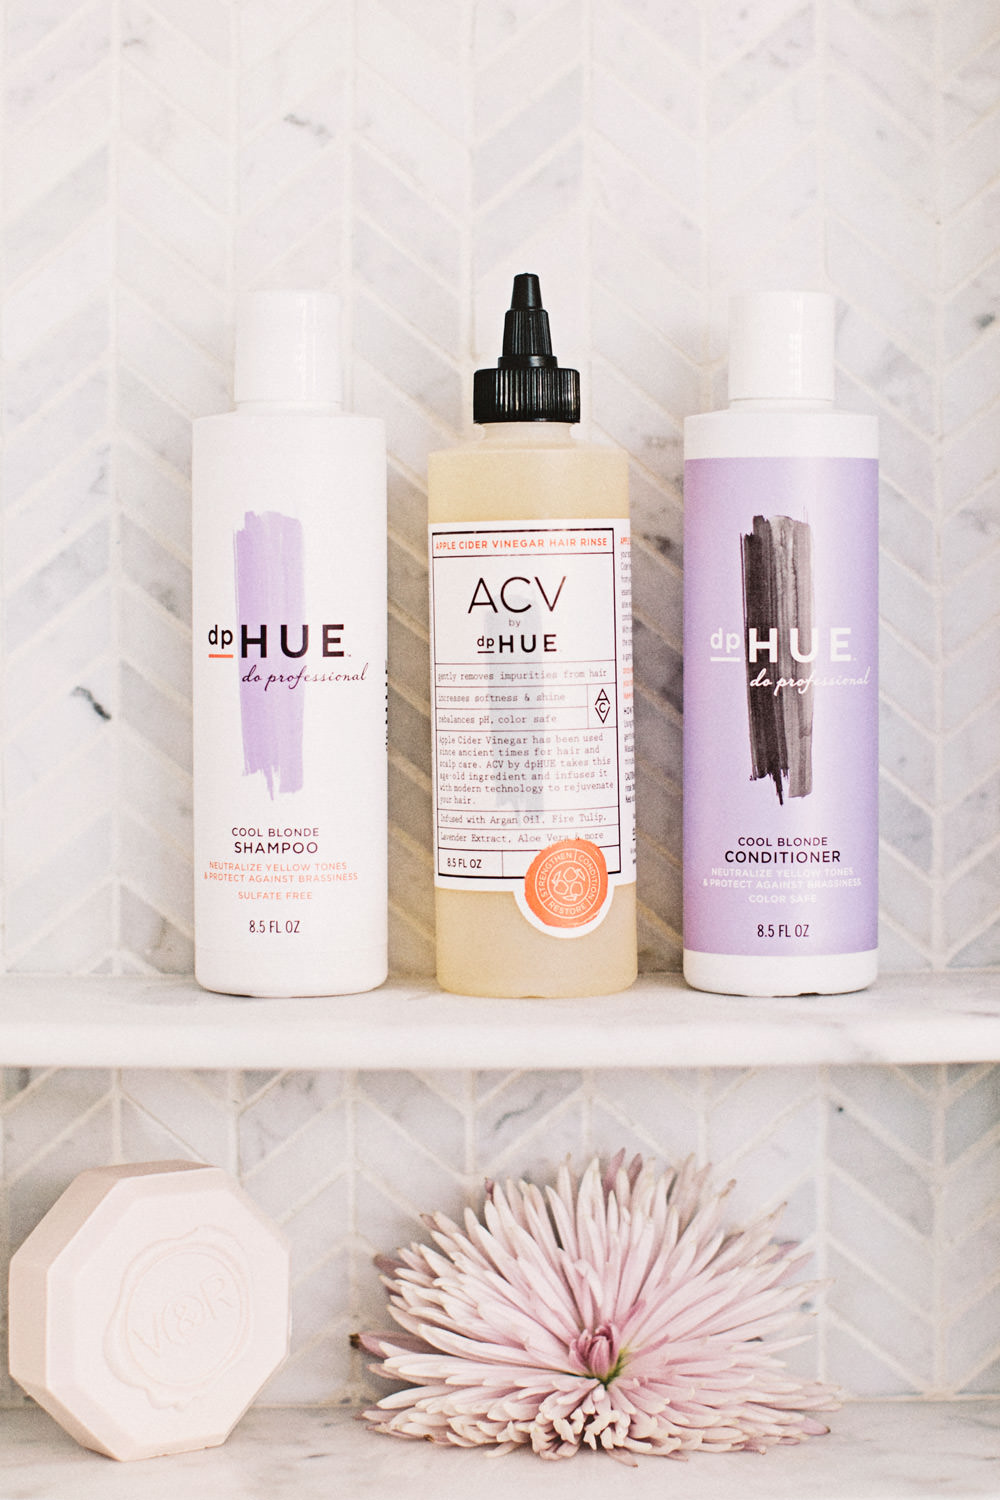 Dash of Darling shares how to keep your hair cool blonde with dphue blonding shampoo and conditioner